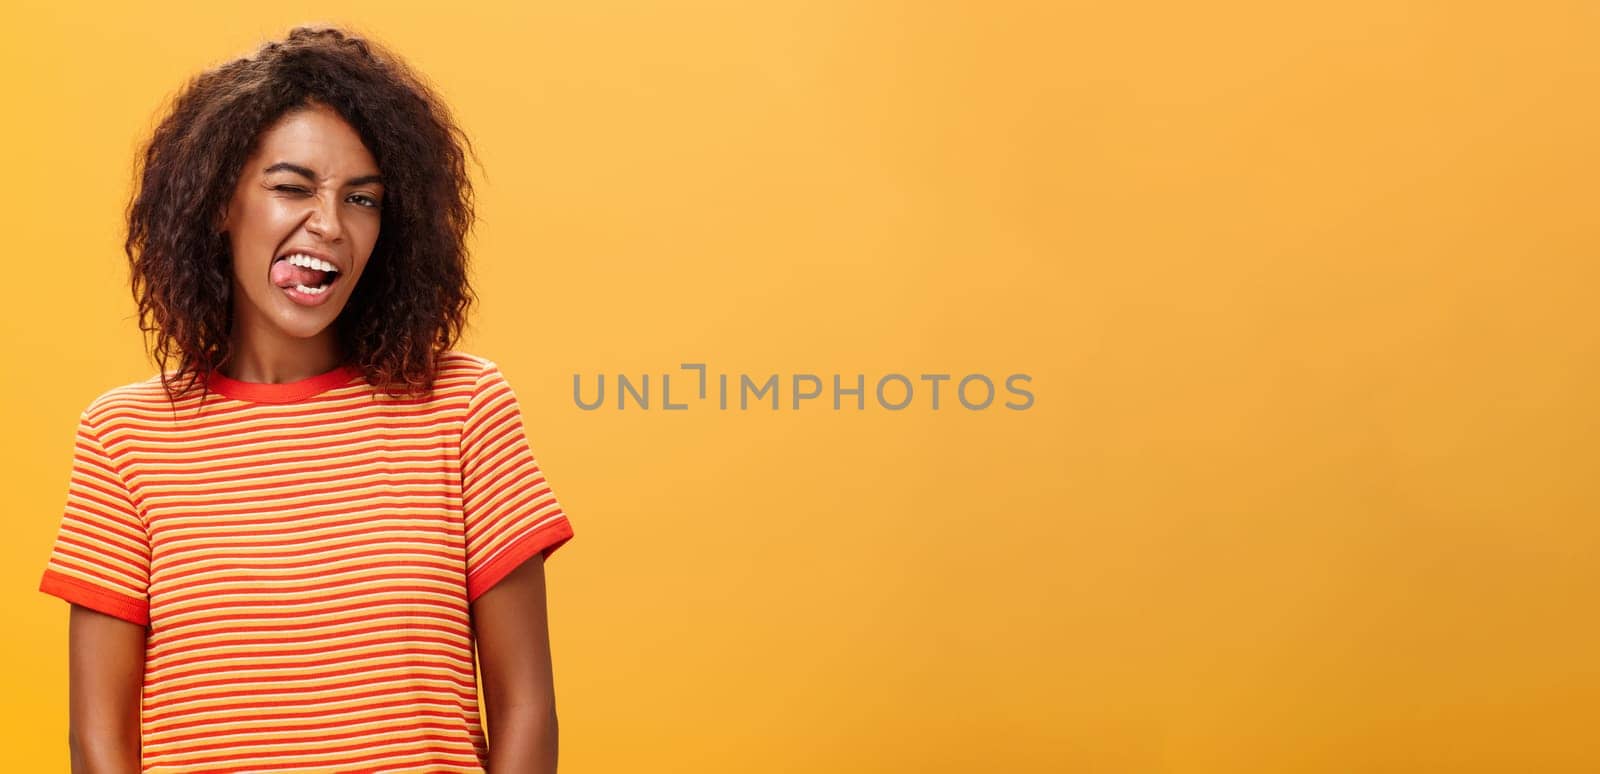 Portrait of daring and emotive confident flirty woman with afro hairstyle winking joyfully showing tongue posing carefree and enthusiastic against orange background flirting with hot guy by Benzoix